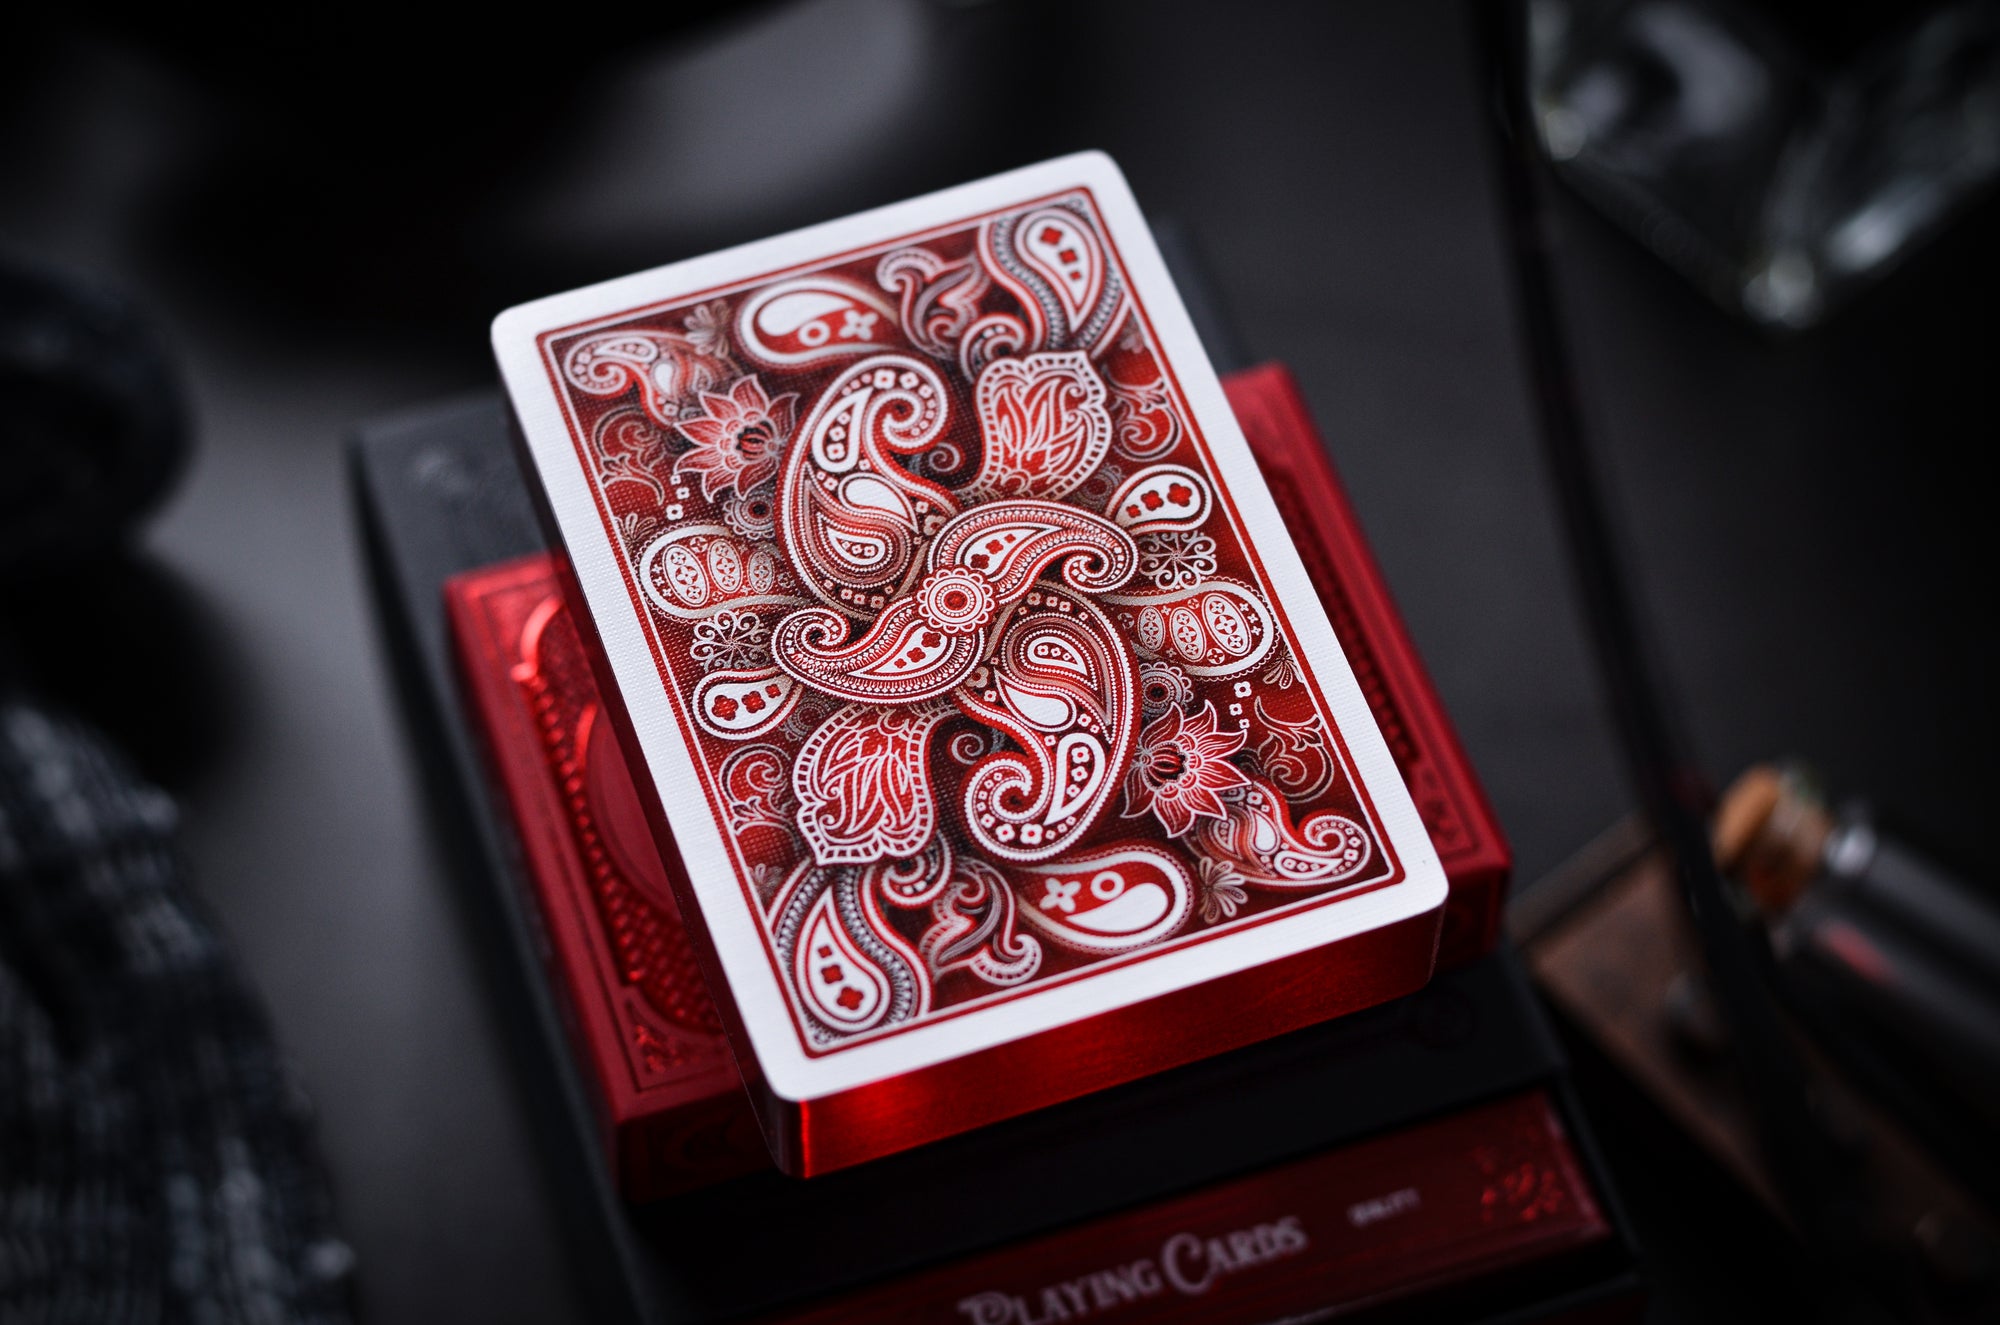 Wonder Playing Cards - Scarlet - Red Gilded